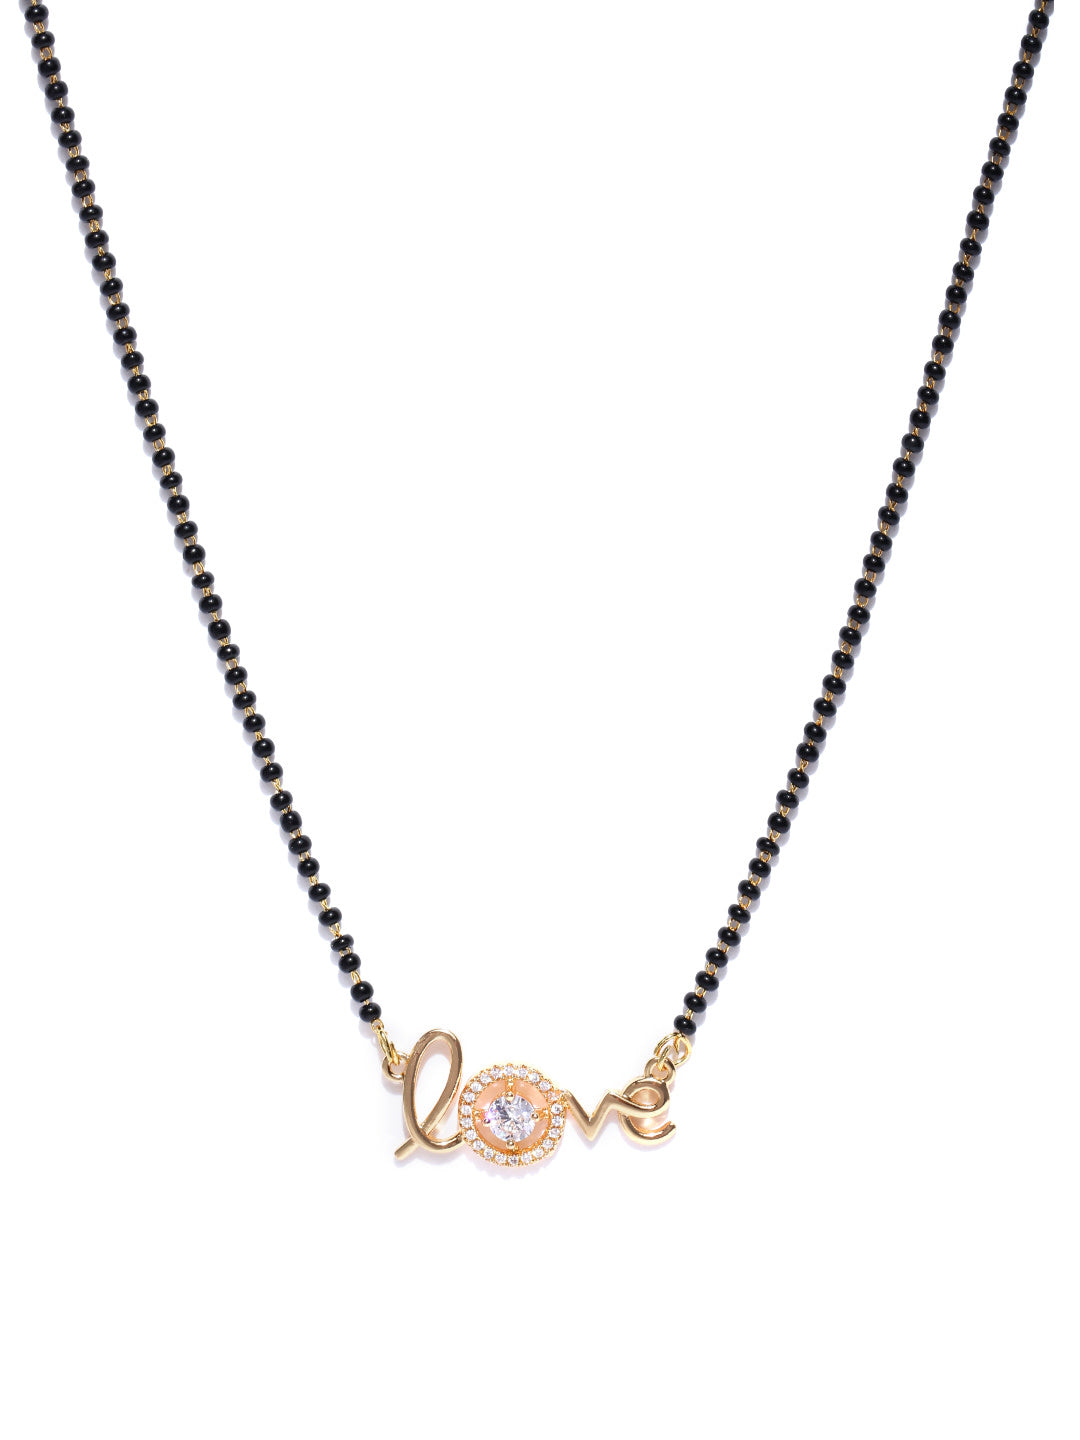 Gold-Plated AD Studded LOVE Message Mangalsutra With Black Beads Chain